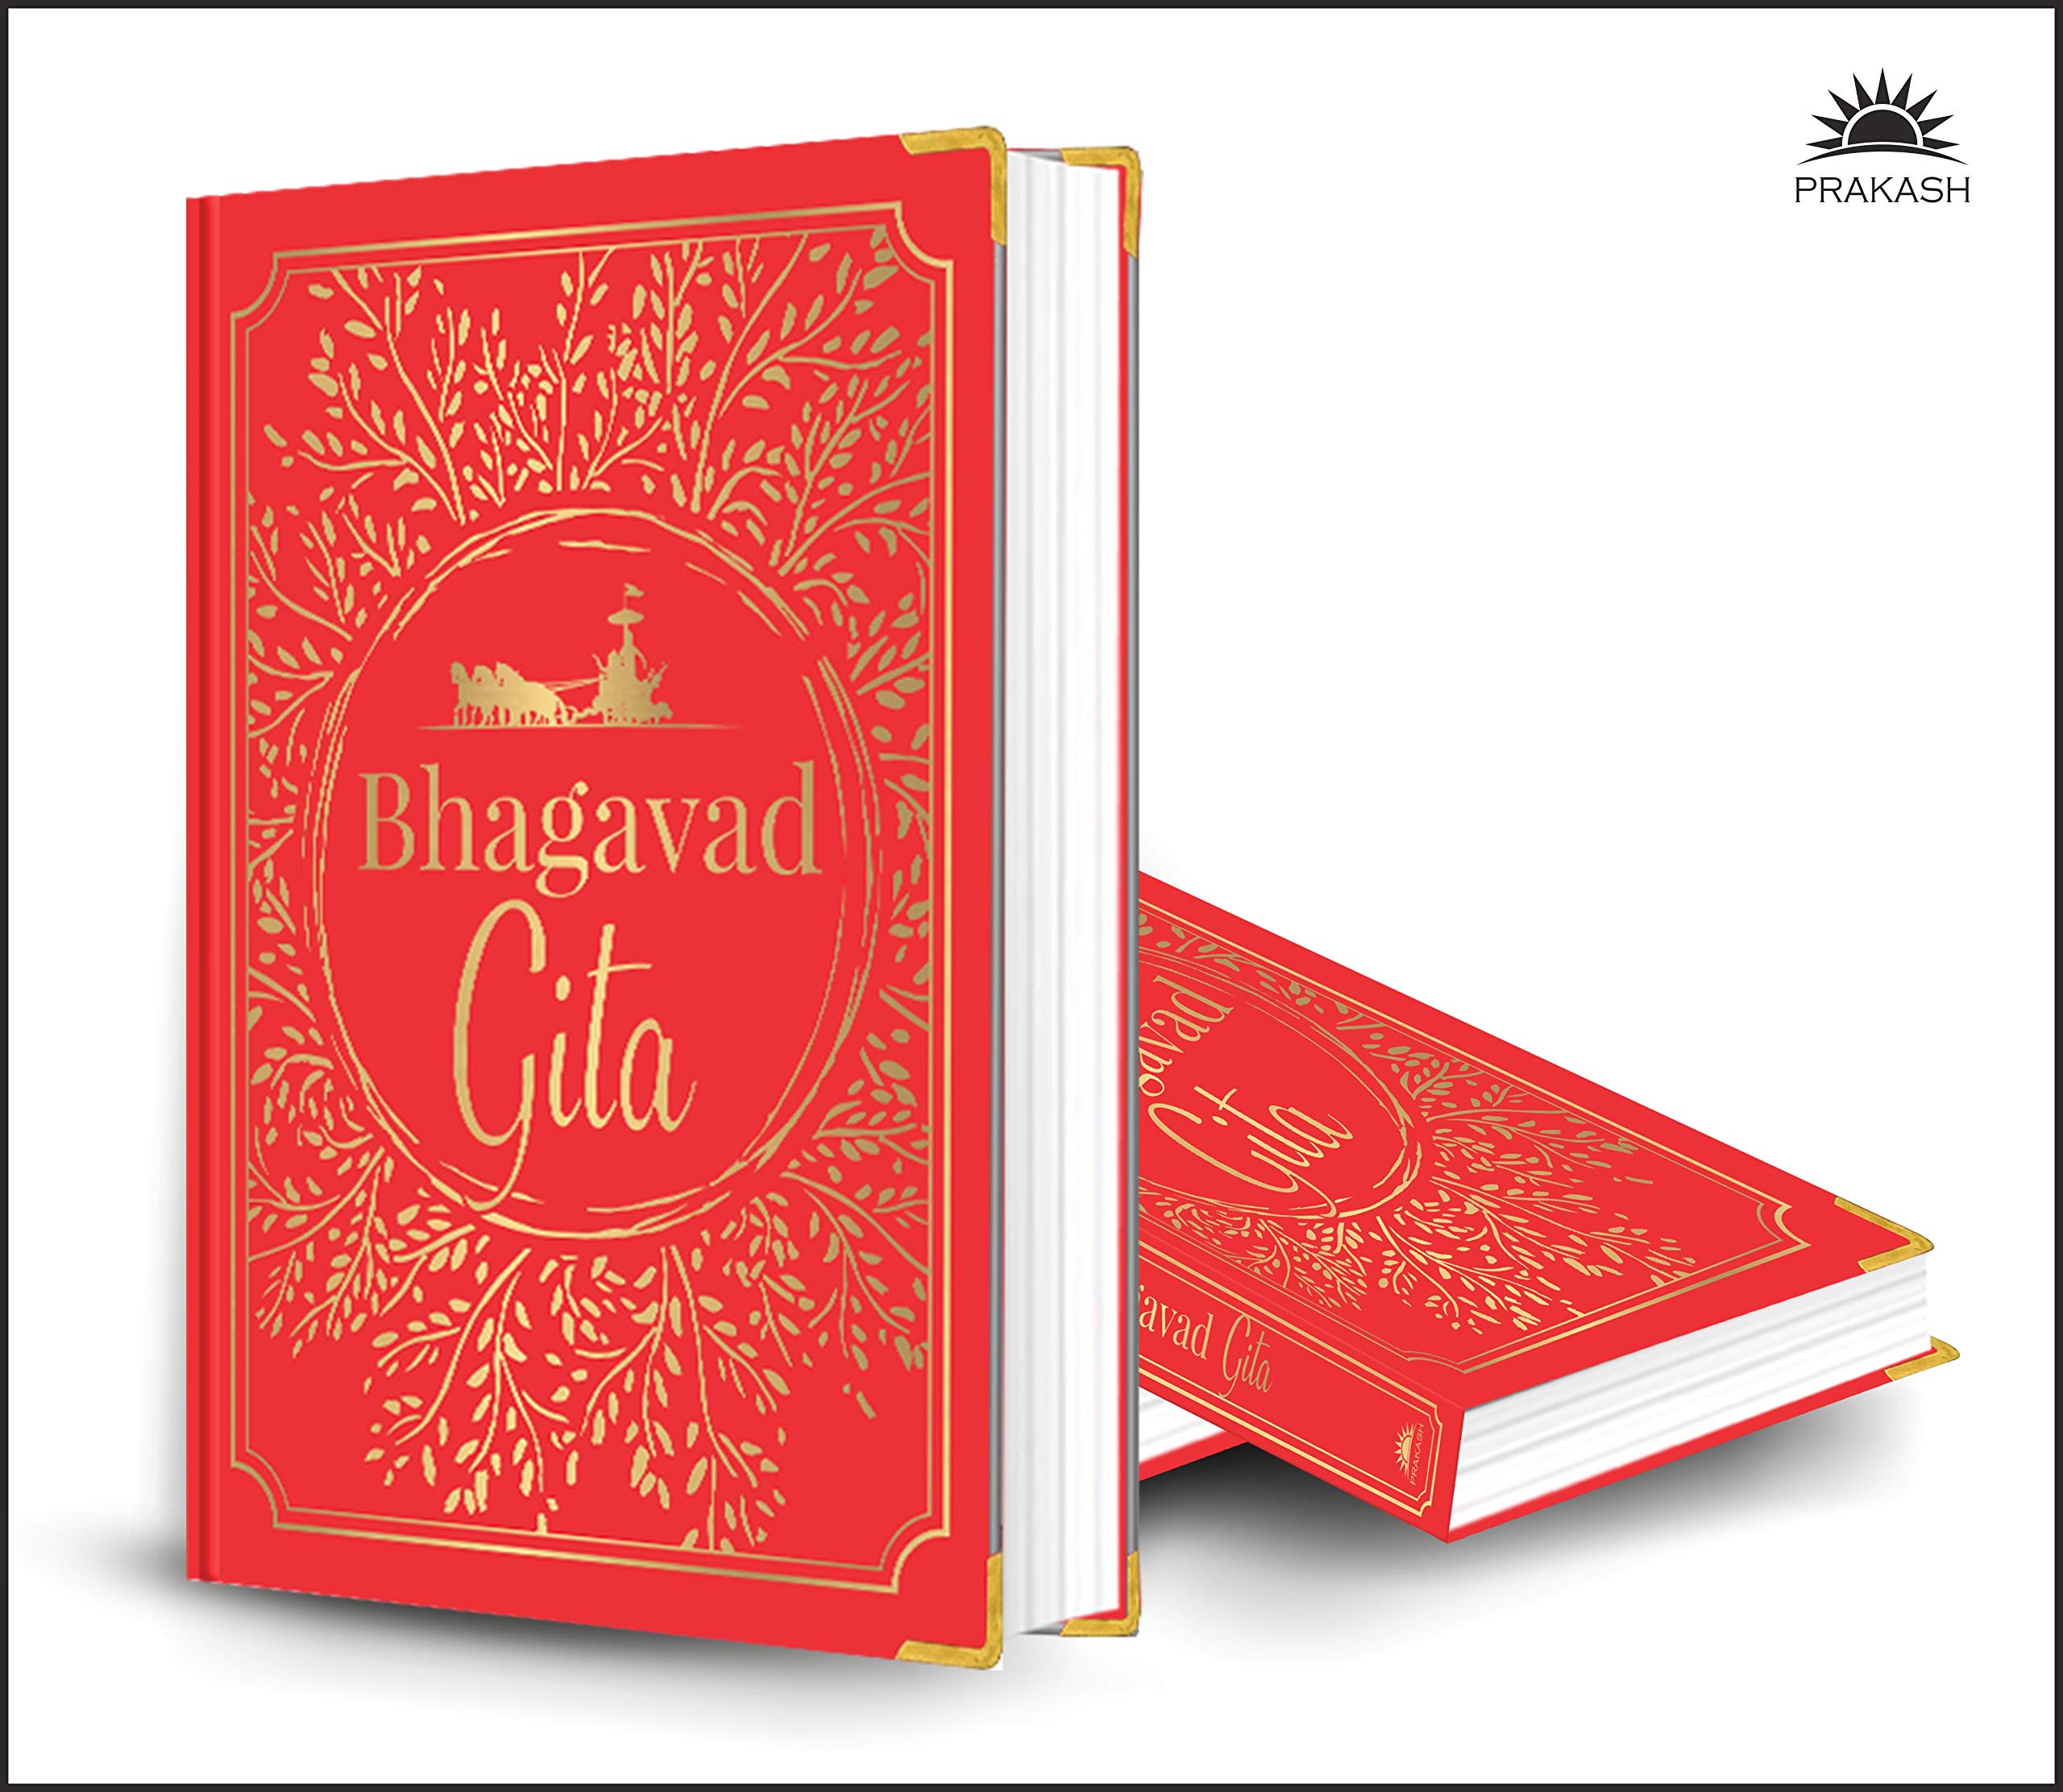 Bhagavad Gita [Deluxe Hardbound Edition] Sacred Text for Self-Realization and Spiritual Enlightenment | Discover Ancient Wisdom | Timeless Religious Teachings | Book on India’s Vedic Wisdom